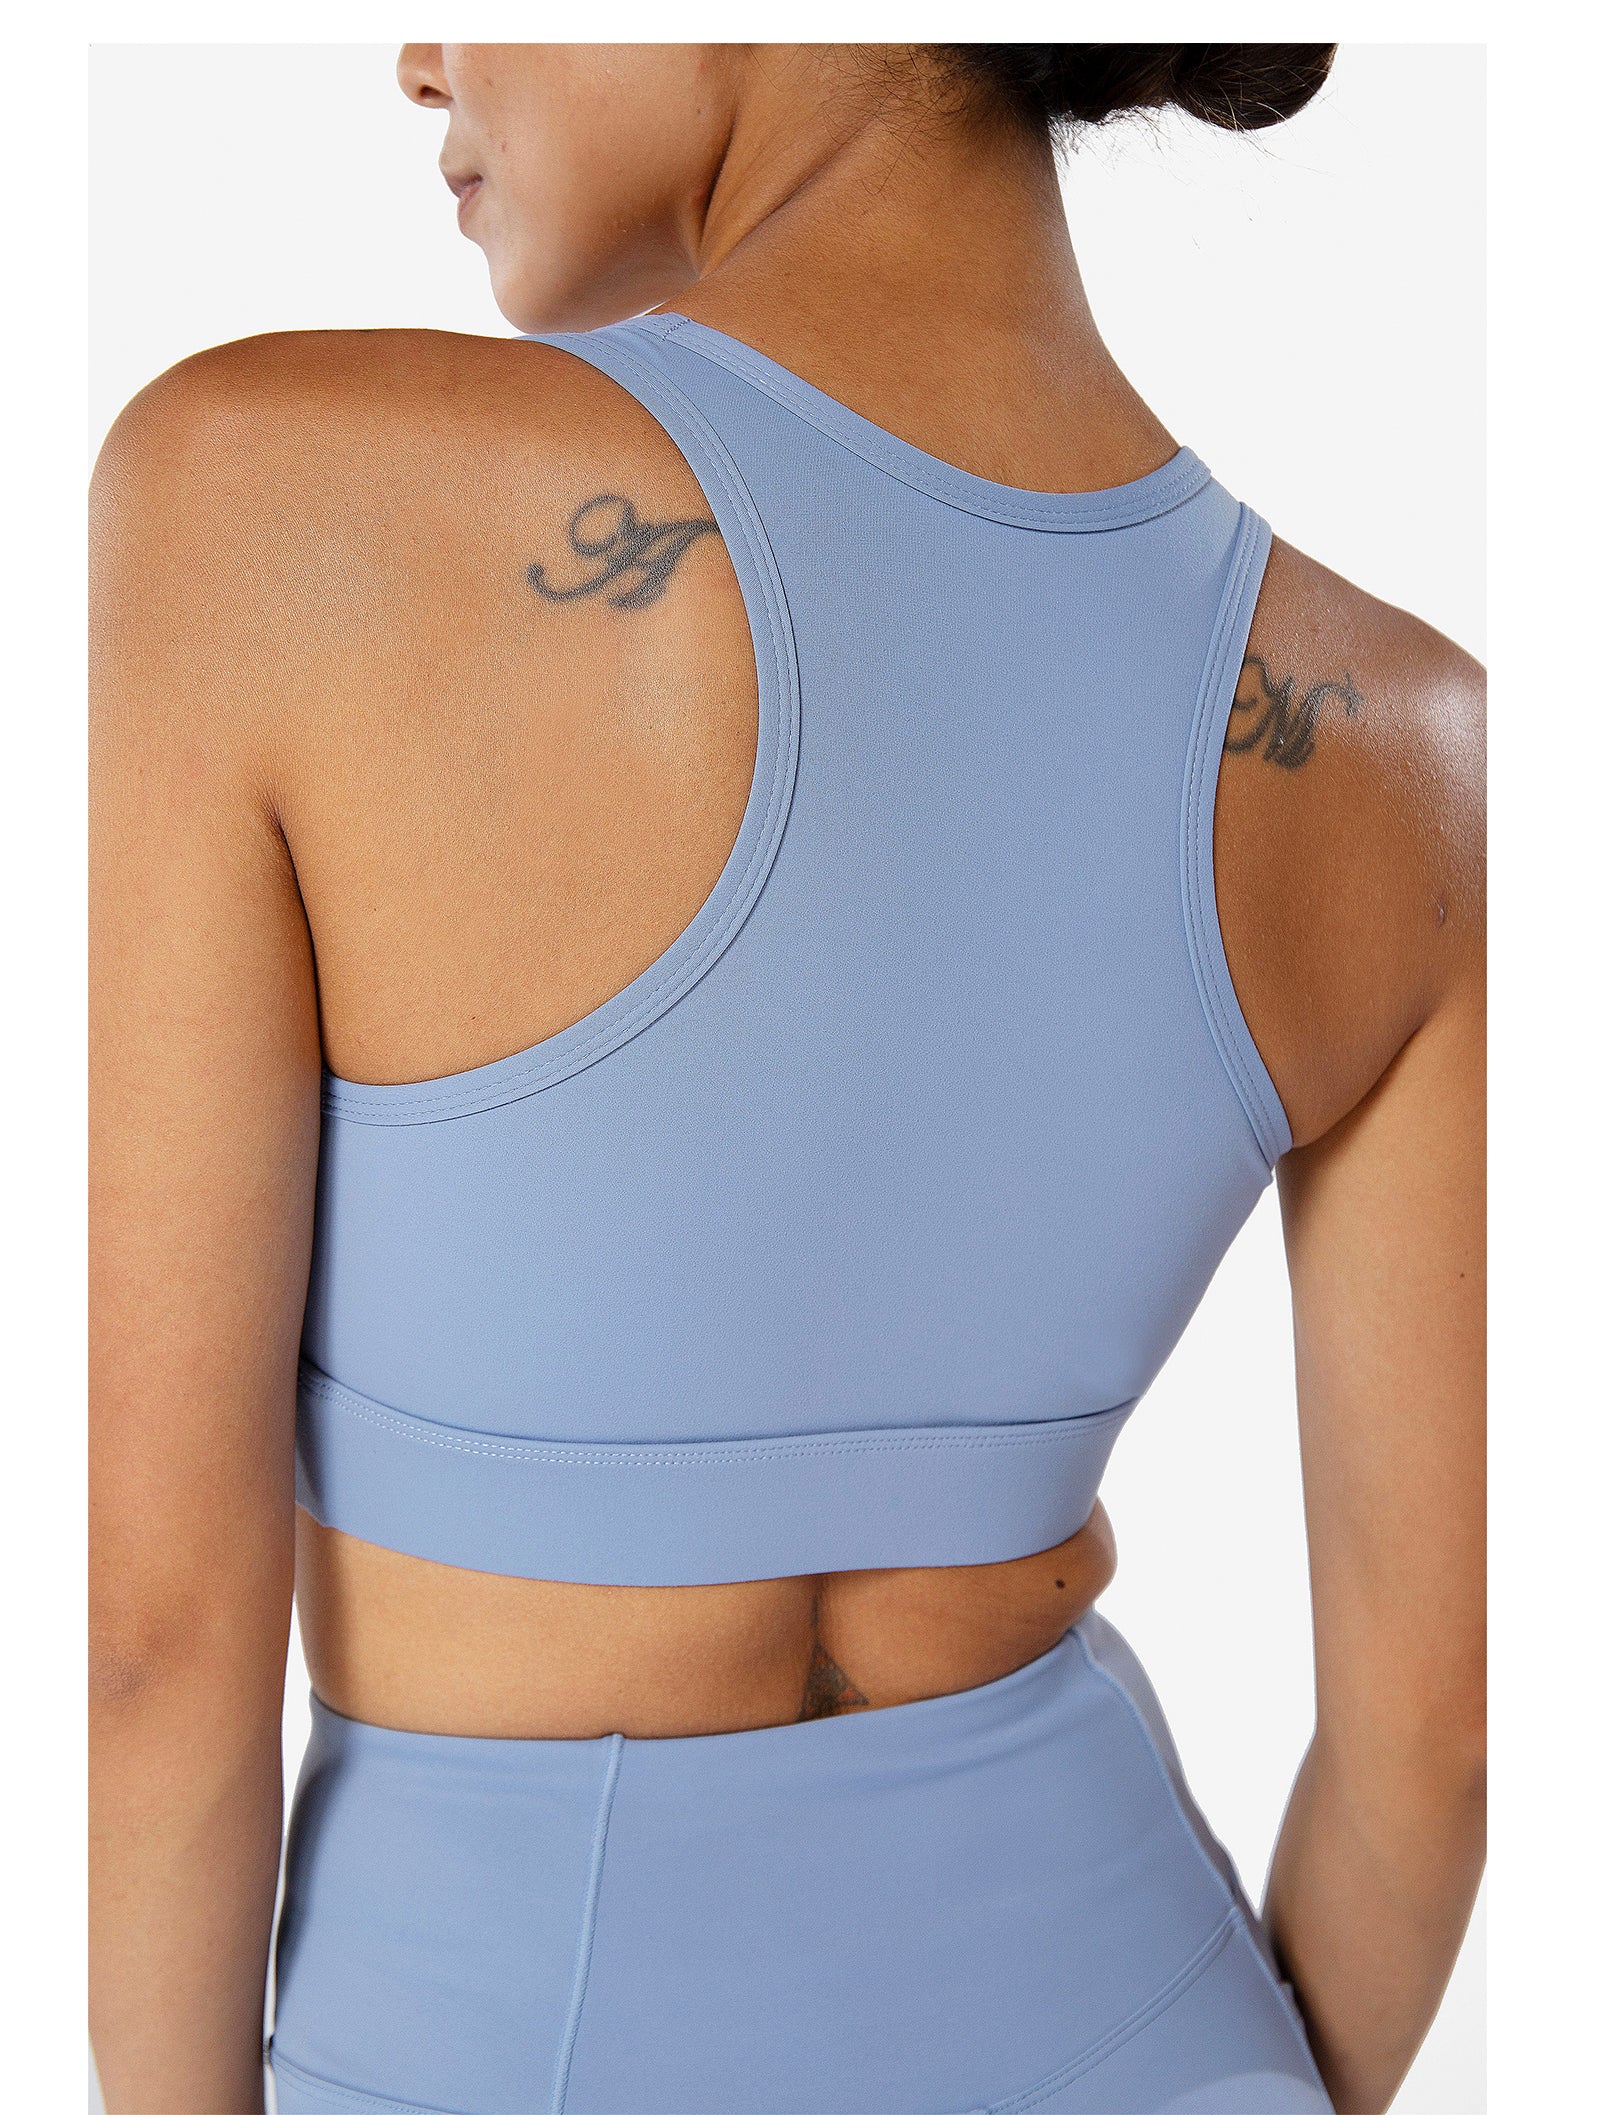 Features of Best Sports Bra